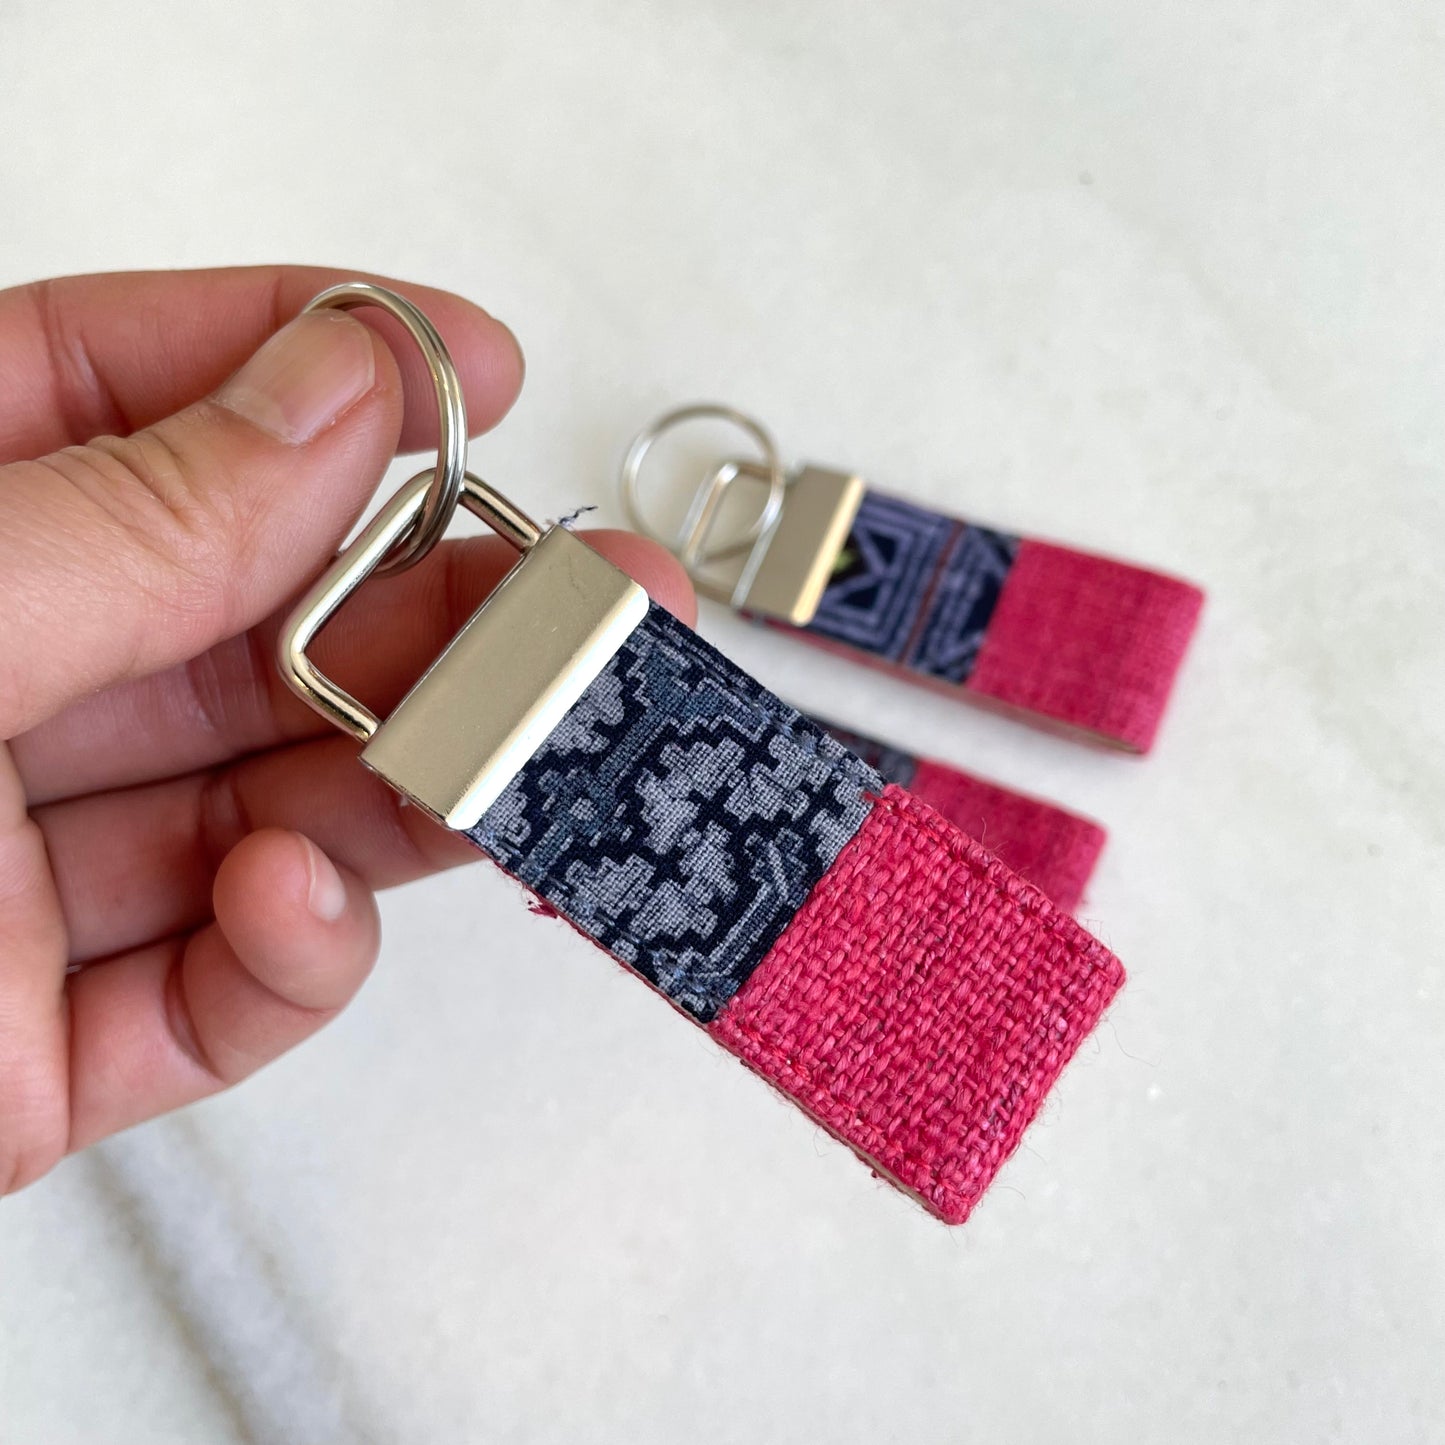 Pink hemp fabric keychain with vintage batik patch, stainless metal key fob